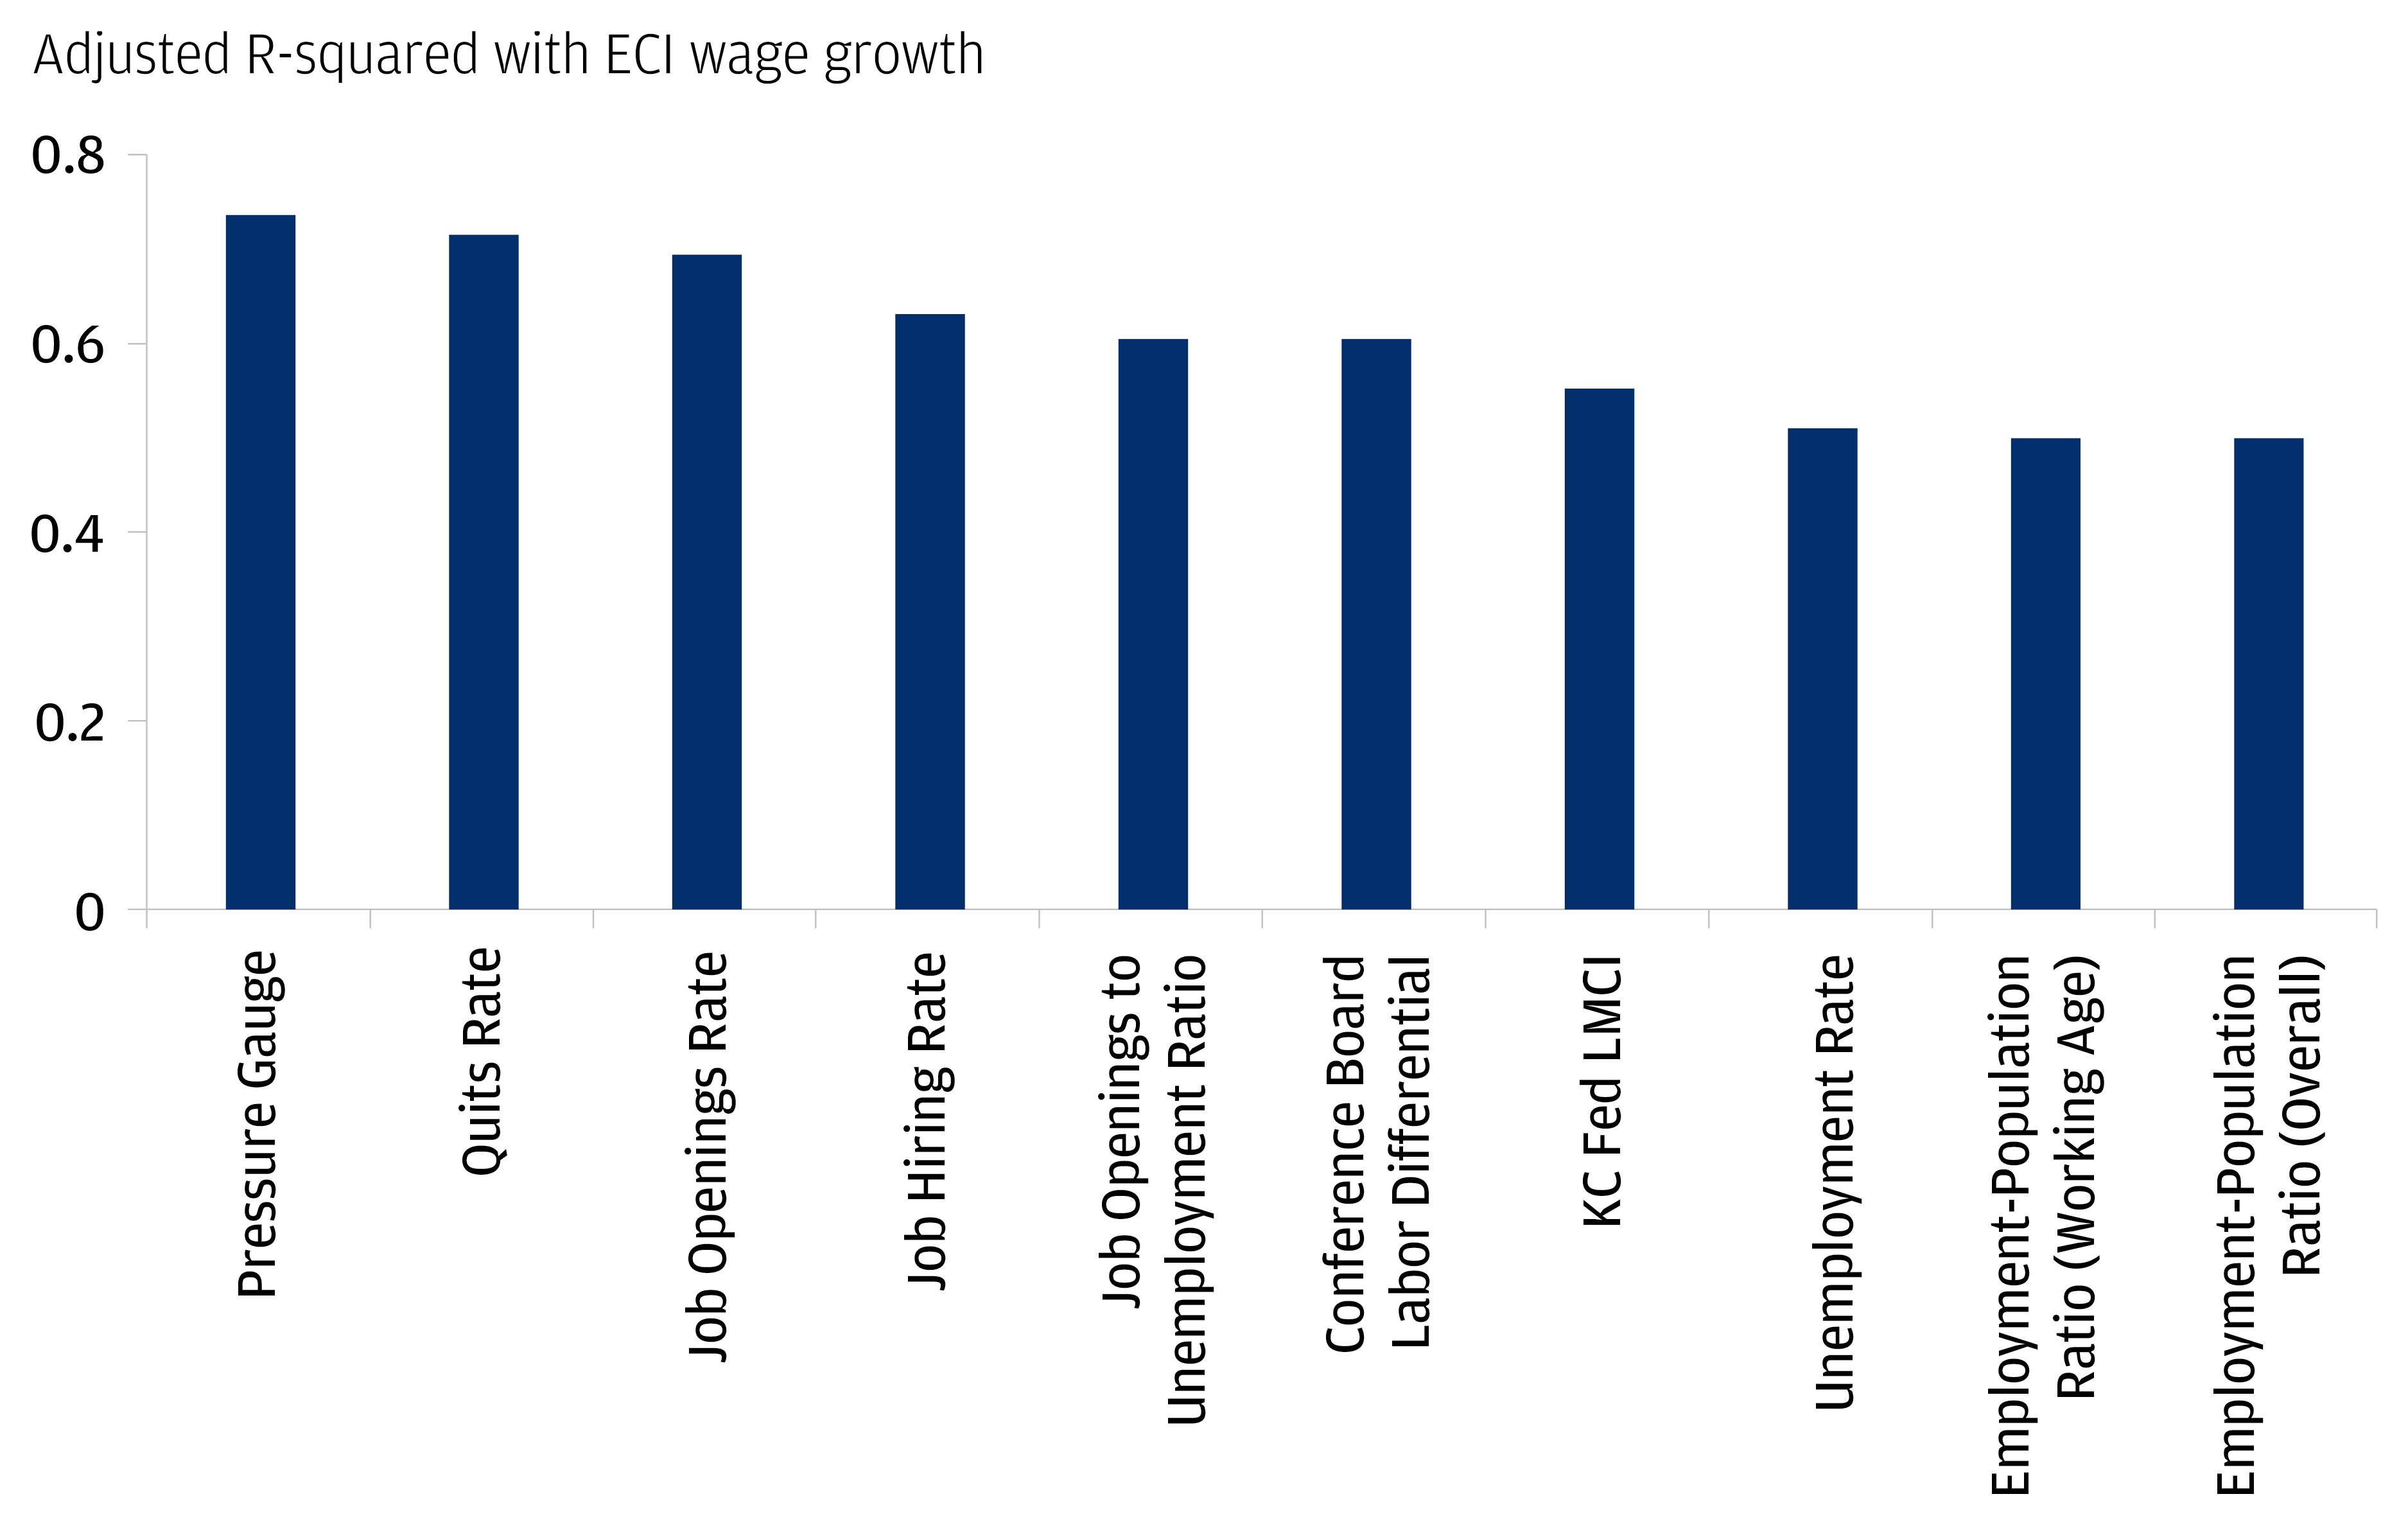 The chart describes the Adjusted R-squared with ECI wage growth for a series of measures to explain wage growth.